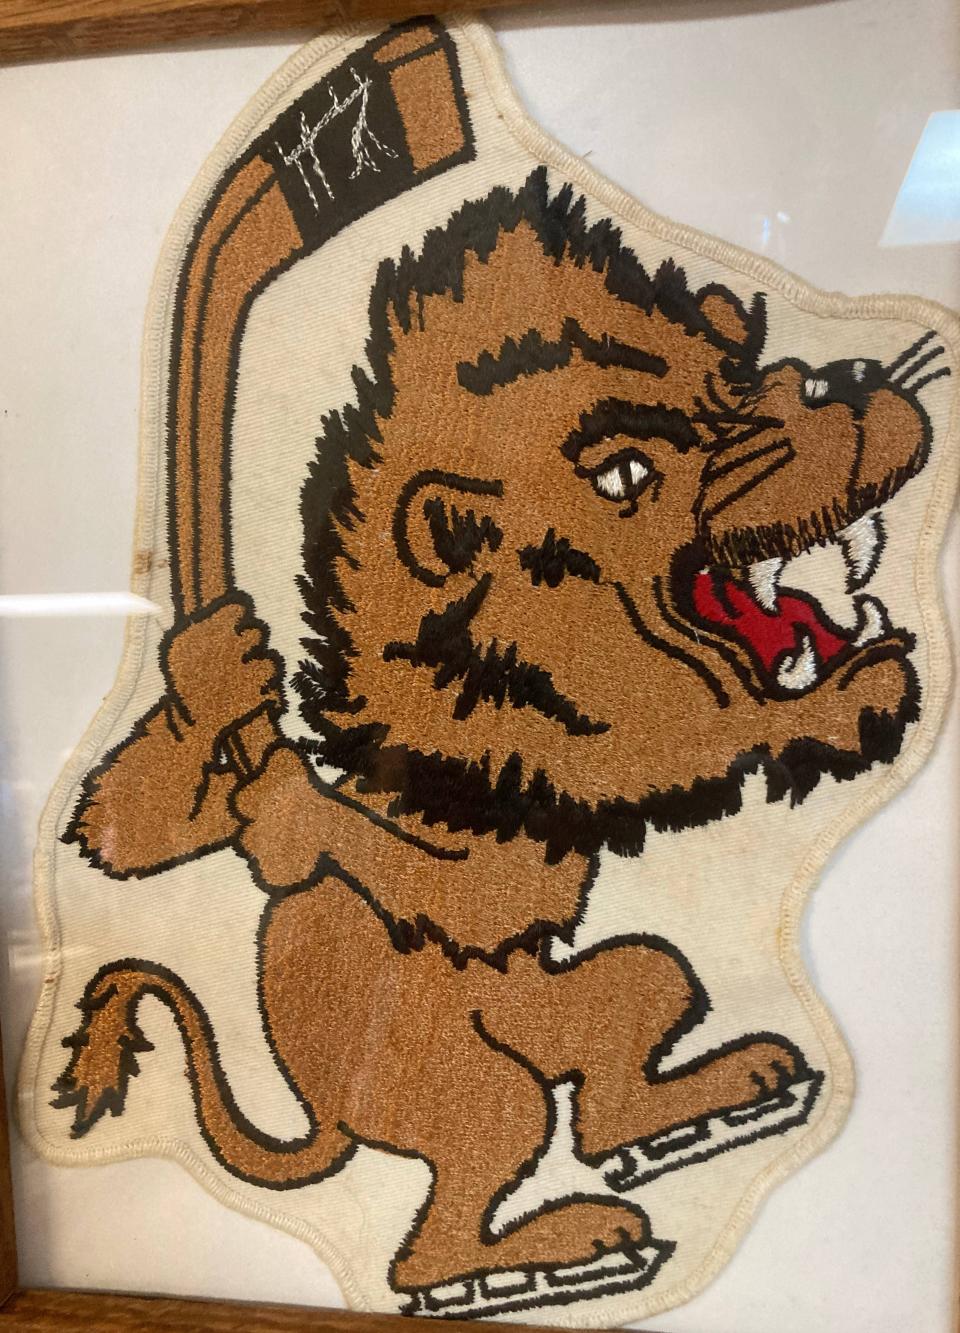 An embroidered Erie Lions patch was among the memorabilia on display during Friday's team reunion at the Sunflower Club. Ron Sciarrilli, a former player, organized the team's first reunion since 1986.